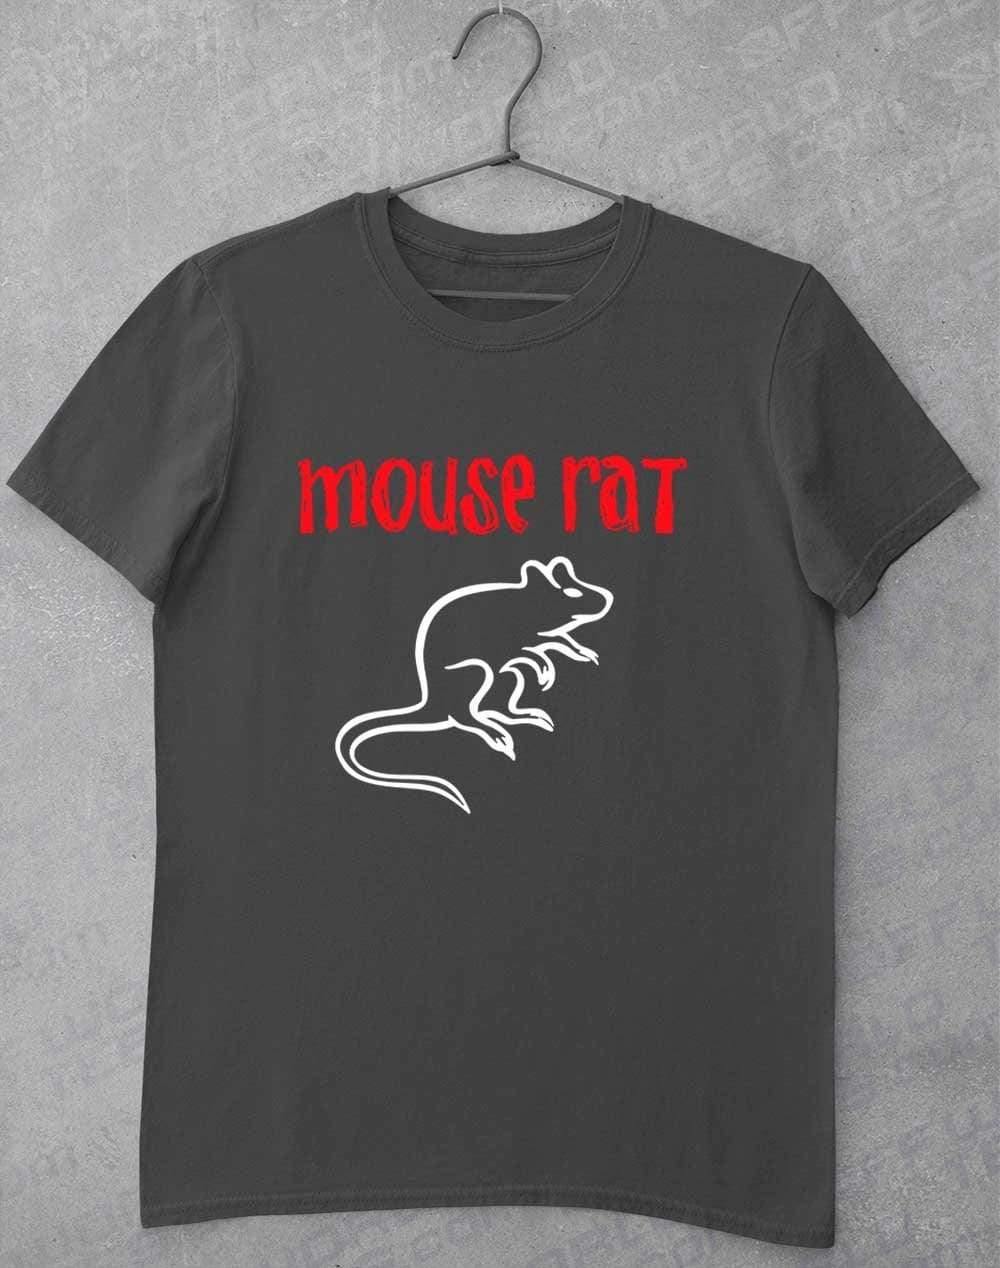 Mouse Rat Text Logo T-Shirt S / Charcoal  - Off World Tees